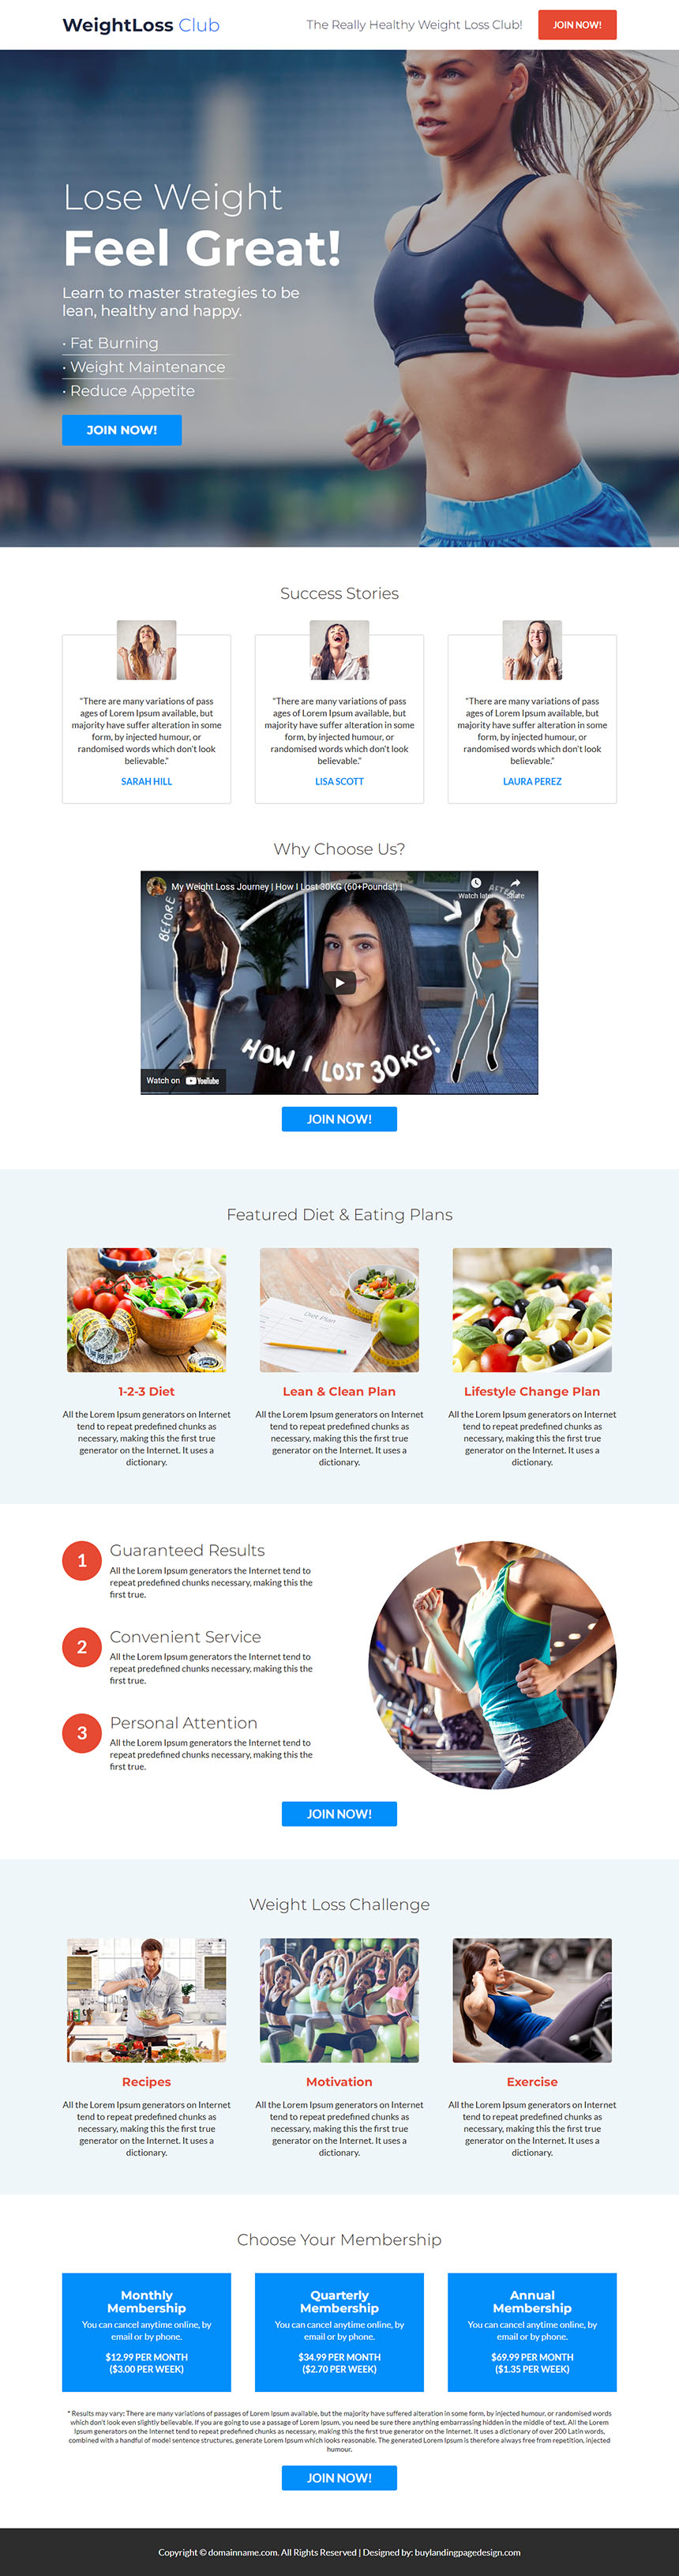 weight loss club responsive landing page design